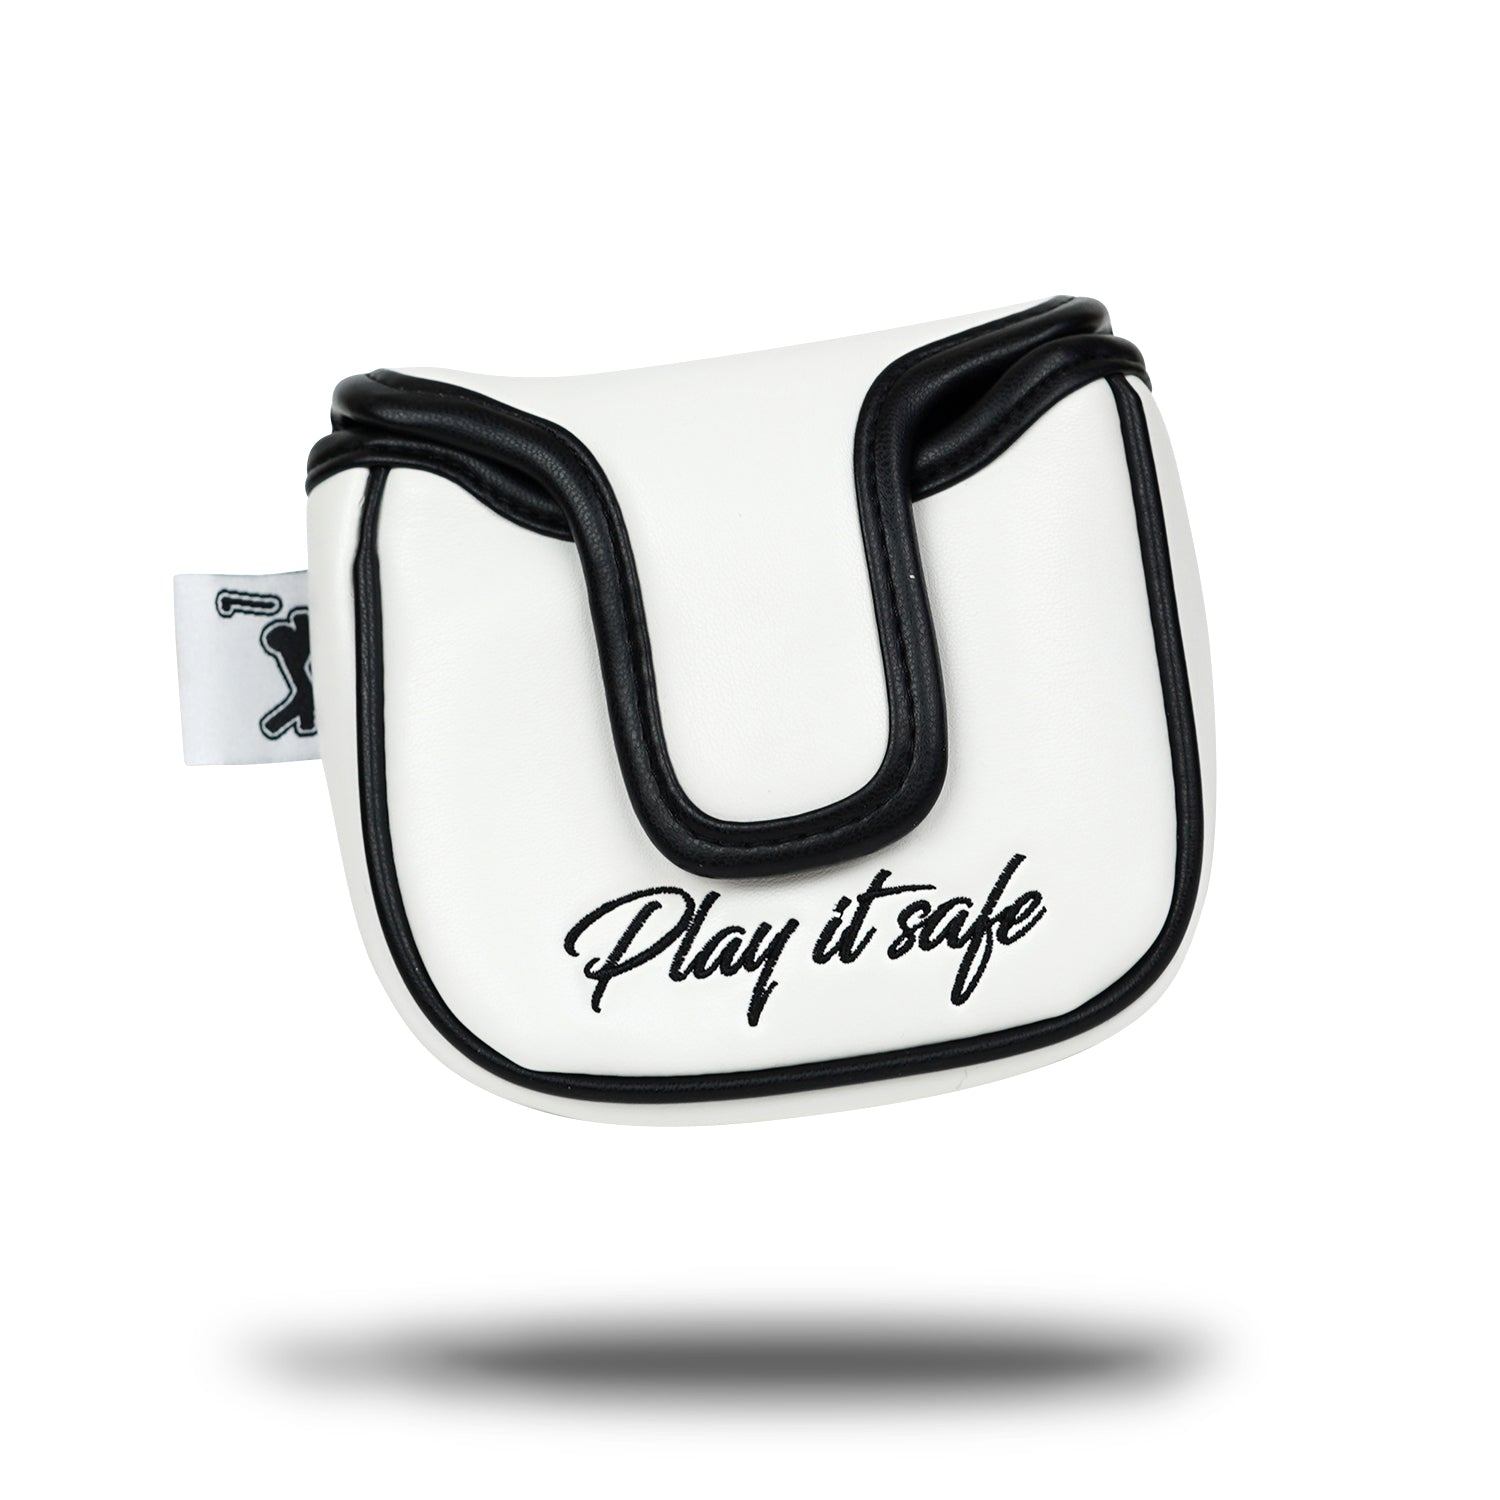 PULL OUT - Mallet Putter Headcover